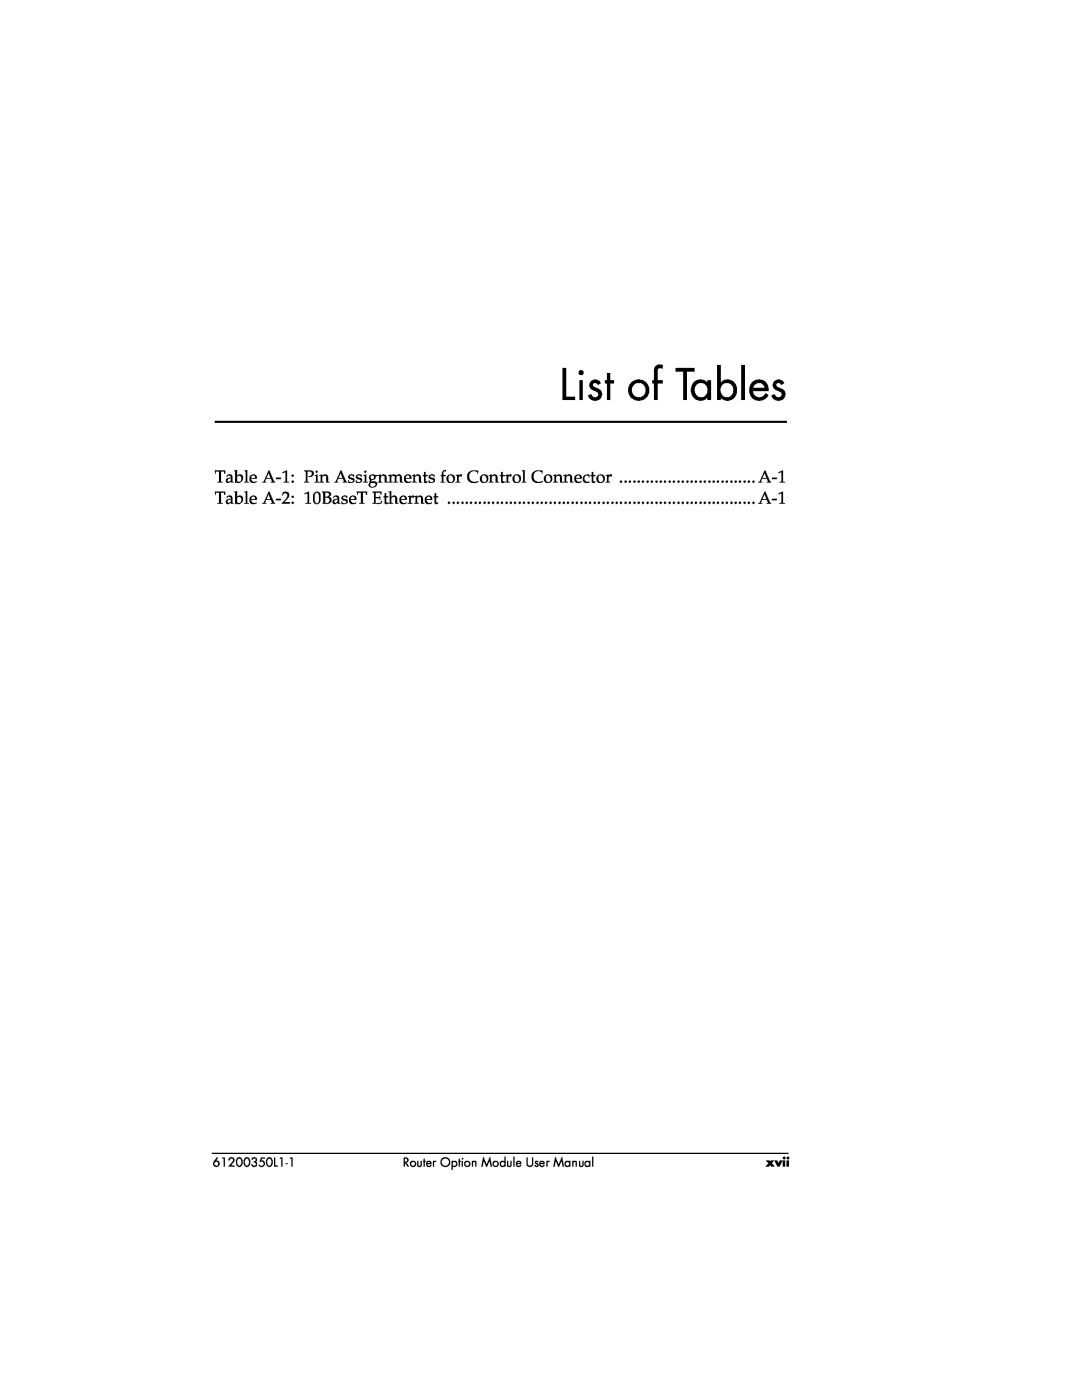 ADTRAN 1200350L1 List of Tables, Table A-1, Pin Assignments for Control Connector, Table A-2, 10BaseT Ethernet, xvii 